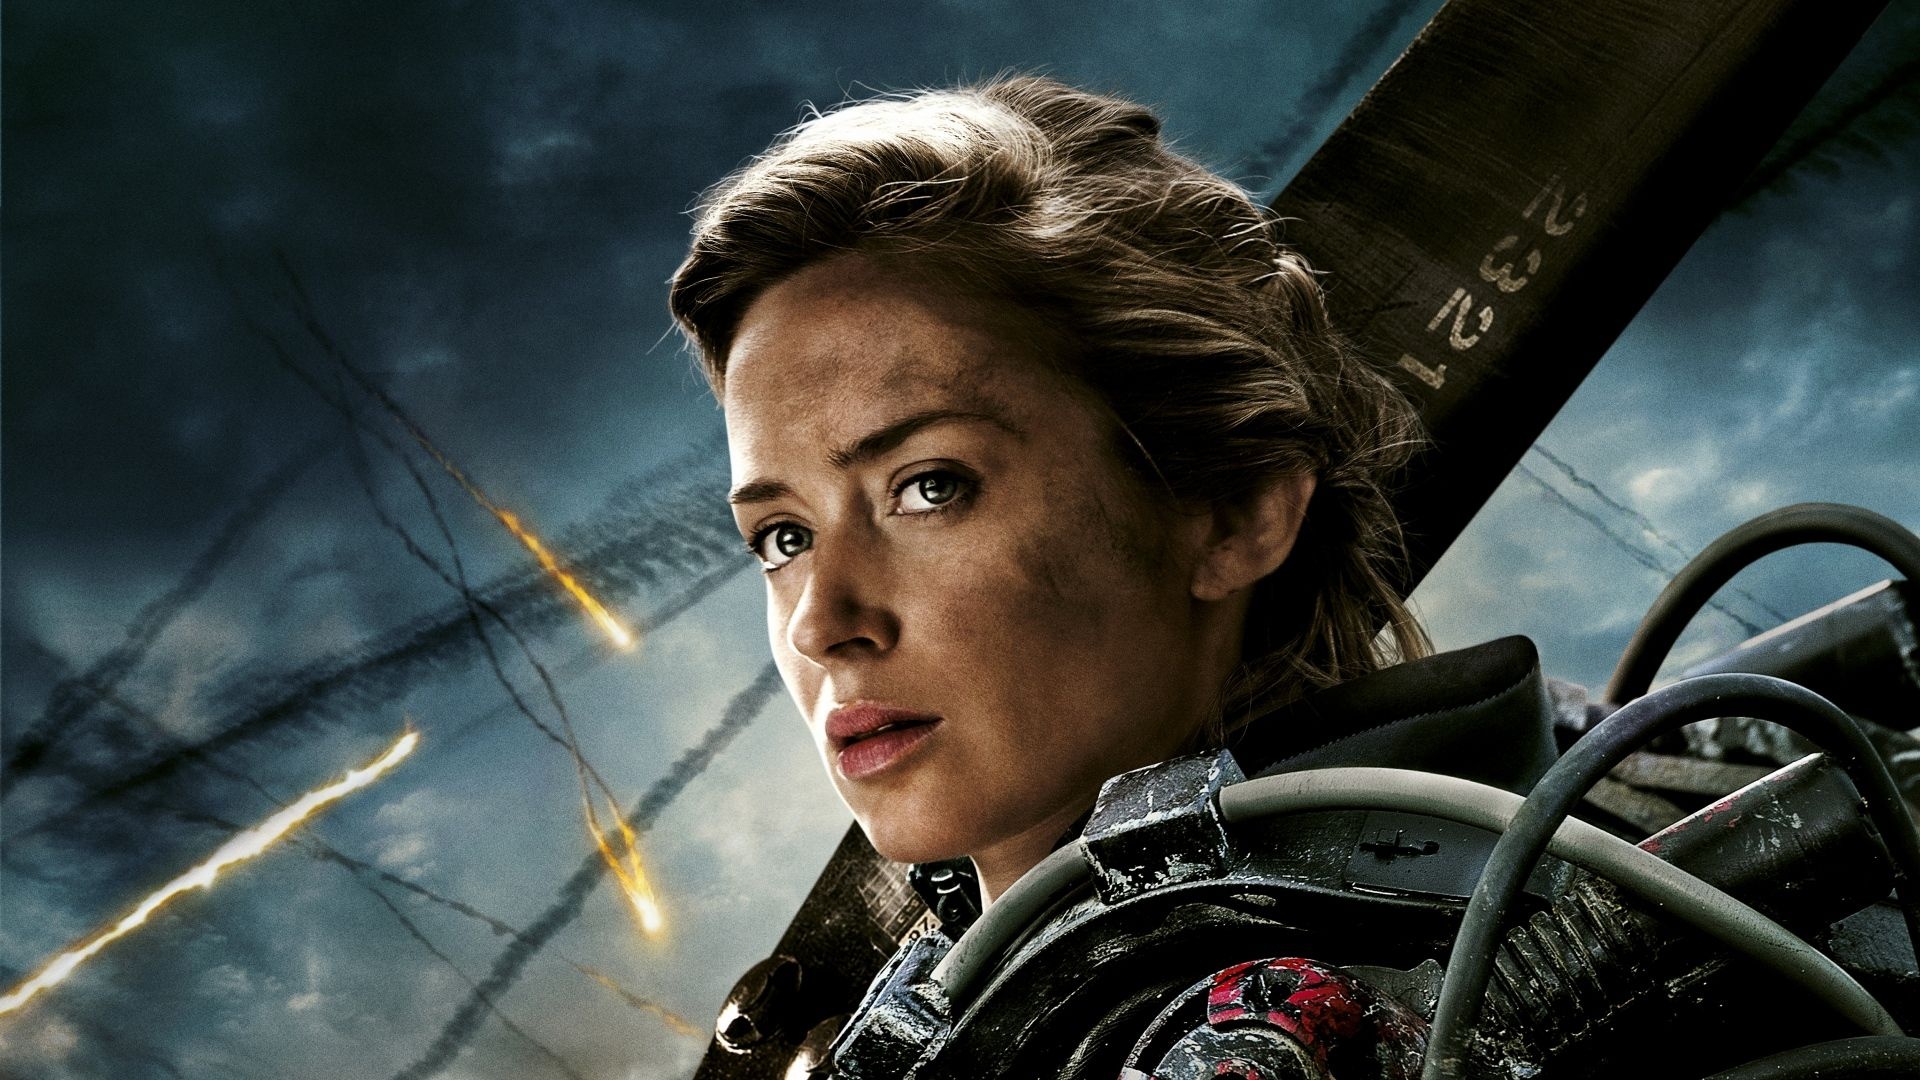 Edge of Tomorrow: Emily Blunt as Rita, The epic action, Sci-fi thriller. 1920x1080 Full HD Wallpaper.